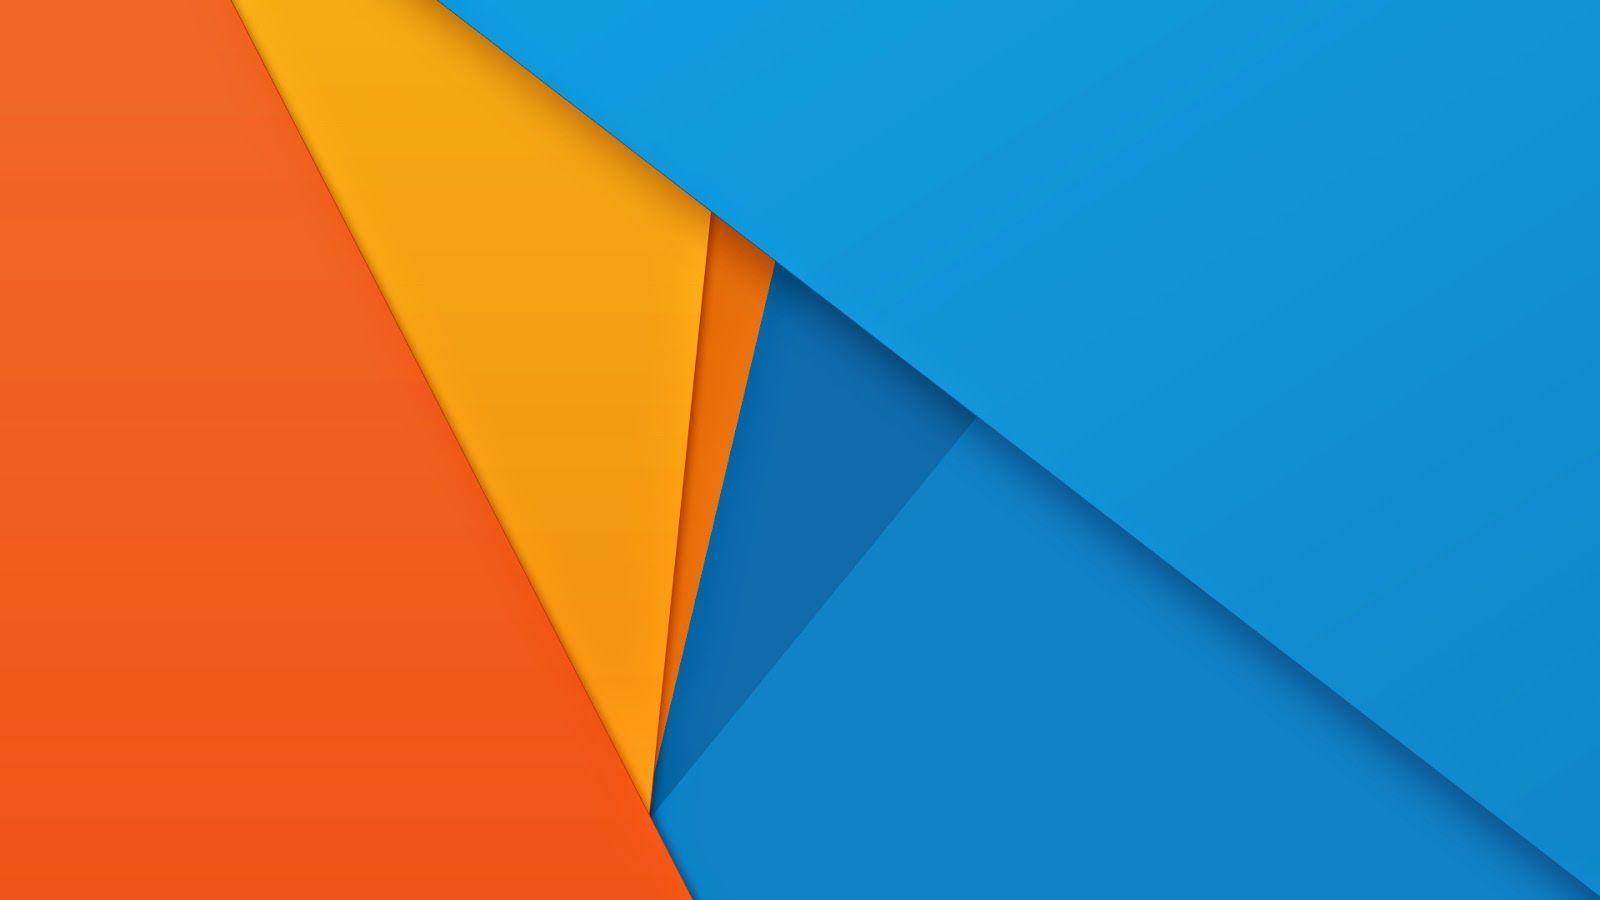 Material design, Wallpaper and Galaxy note 5